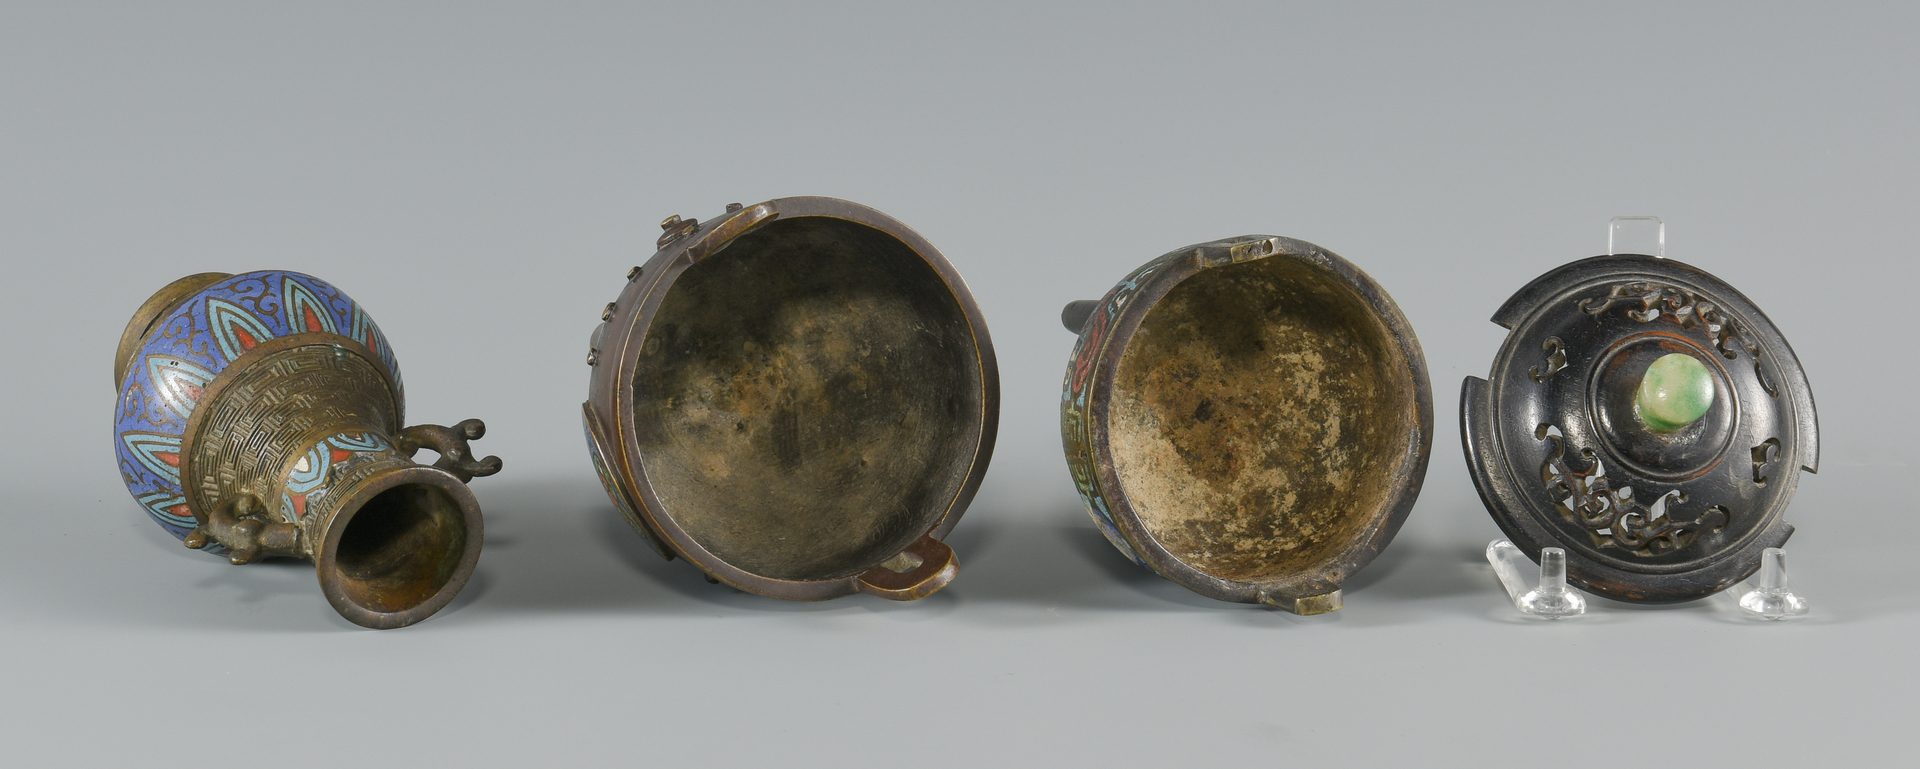 Lot 254: 3 Asian Bronze & Champleve Items